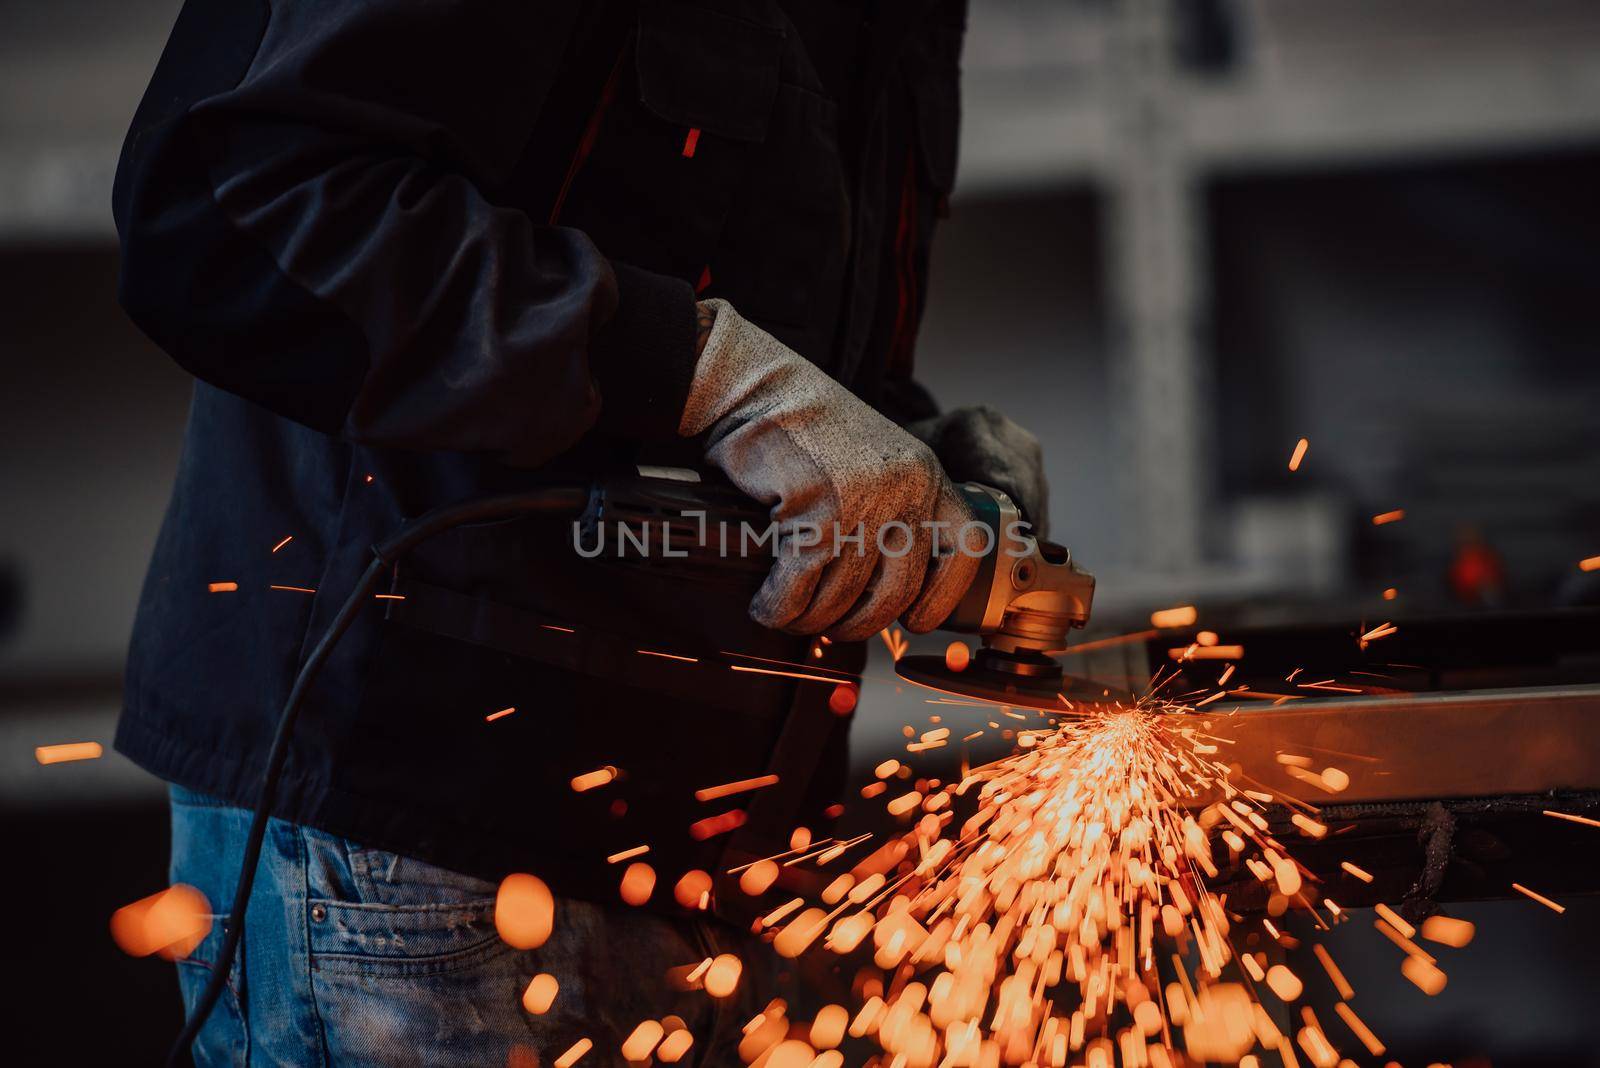 Heavy Industry Engineering Factory Interior with Industrial Worker Using Angle Grinder and Cutting a Metal Tube. Contractor in Safety Uniform and Hard Hat Manufacturing Metal Structures. by dotshock